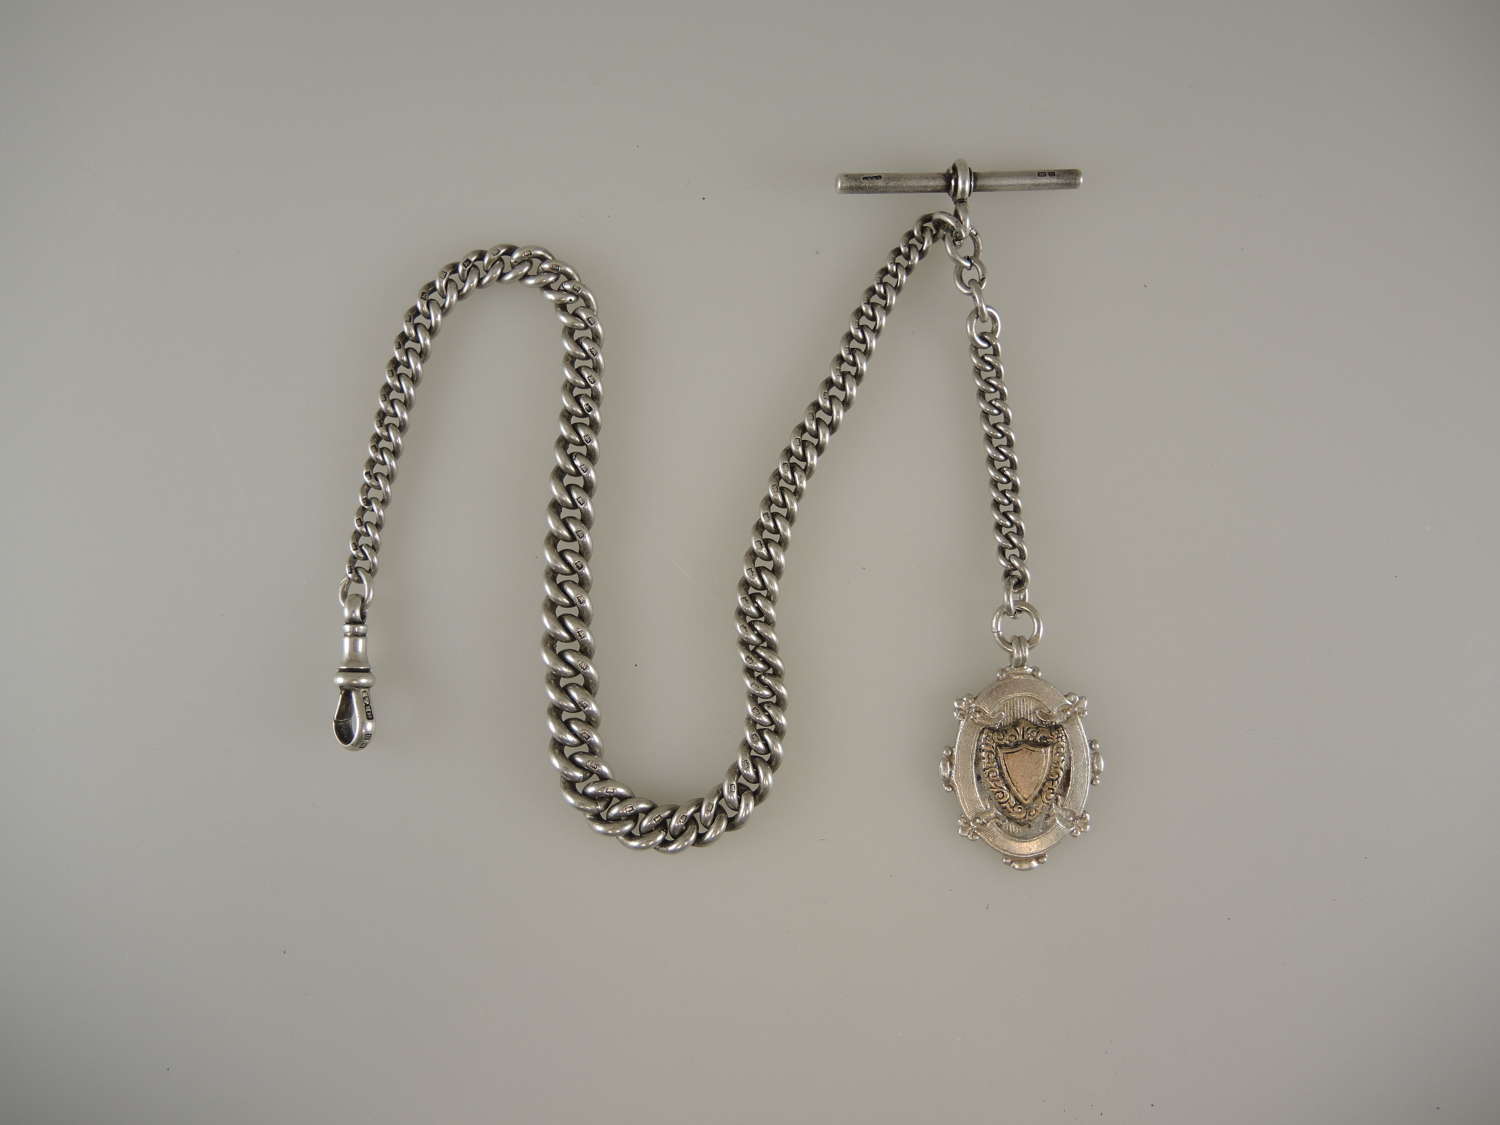 Antique English silver watch chain with fob c1912